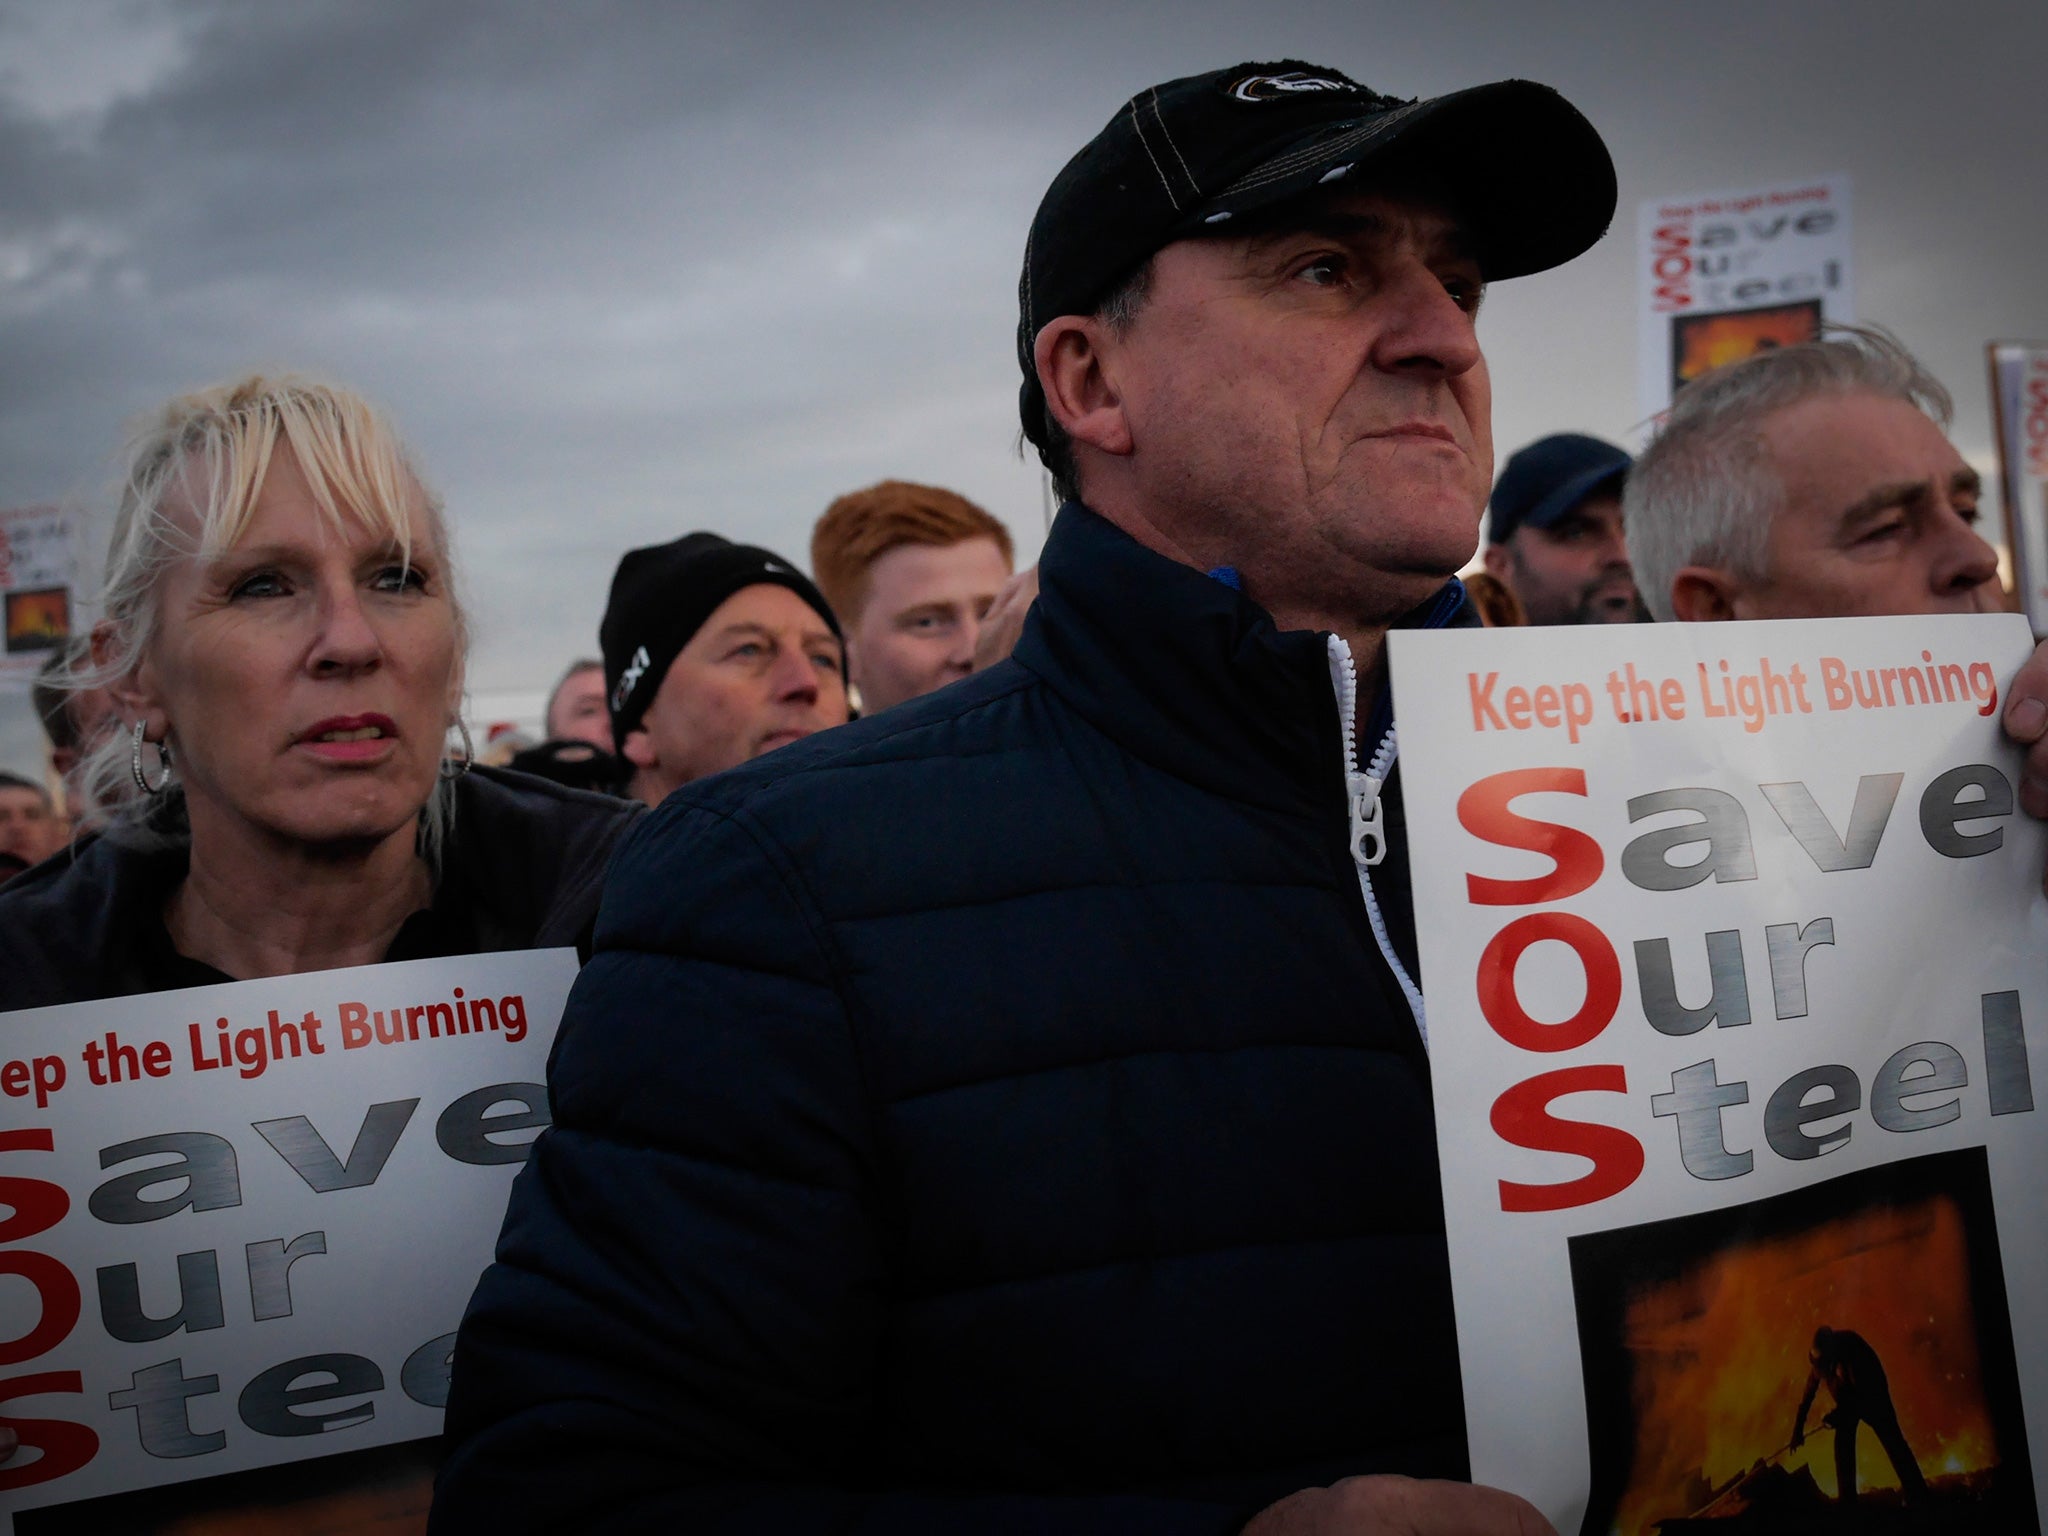 How can Jeremy Corbyn persuade steel workers in Redcar their jobs are worth losing?